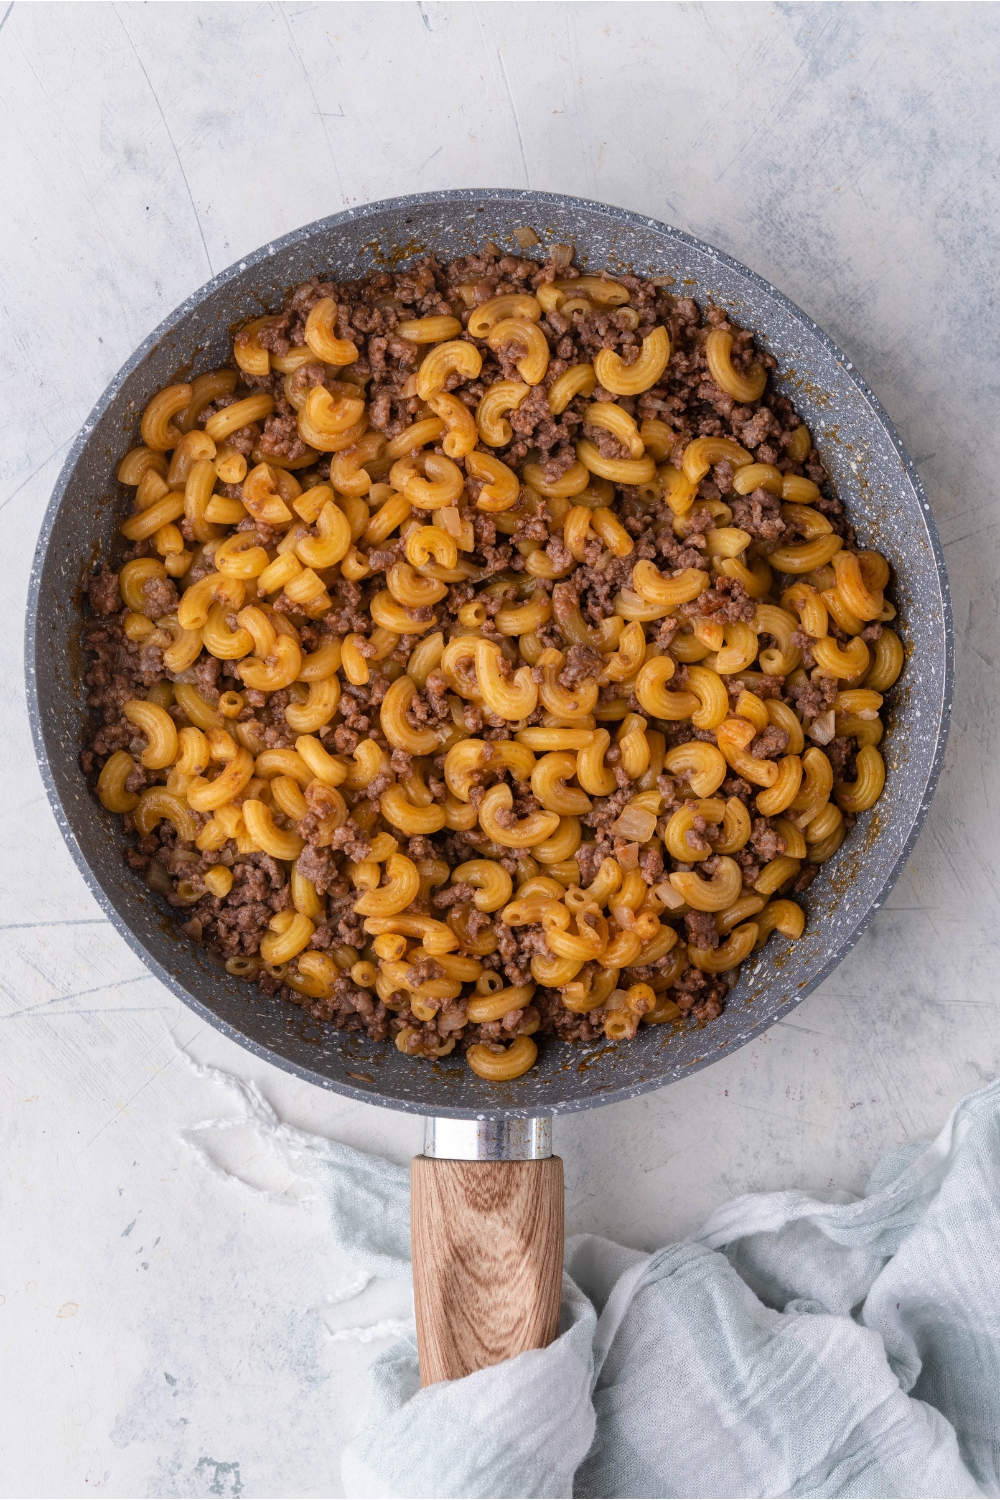 A skillet with cooked elbow macaroni and ground beef mixed together. There is a dish towel wrapped around the handle of the skillet.